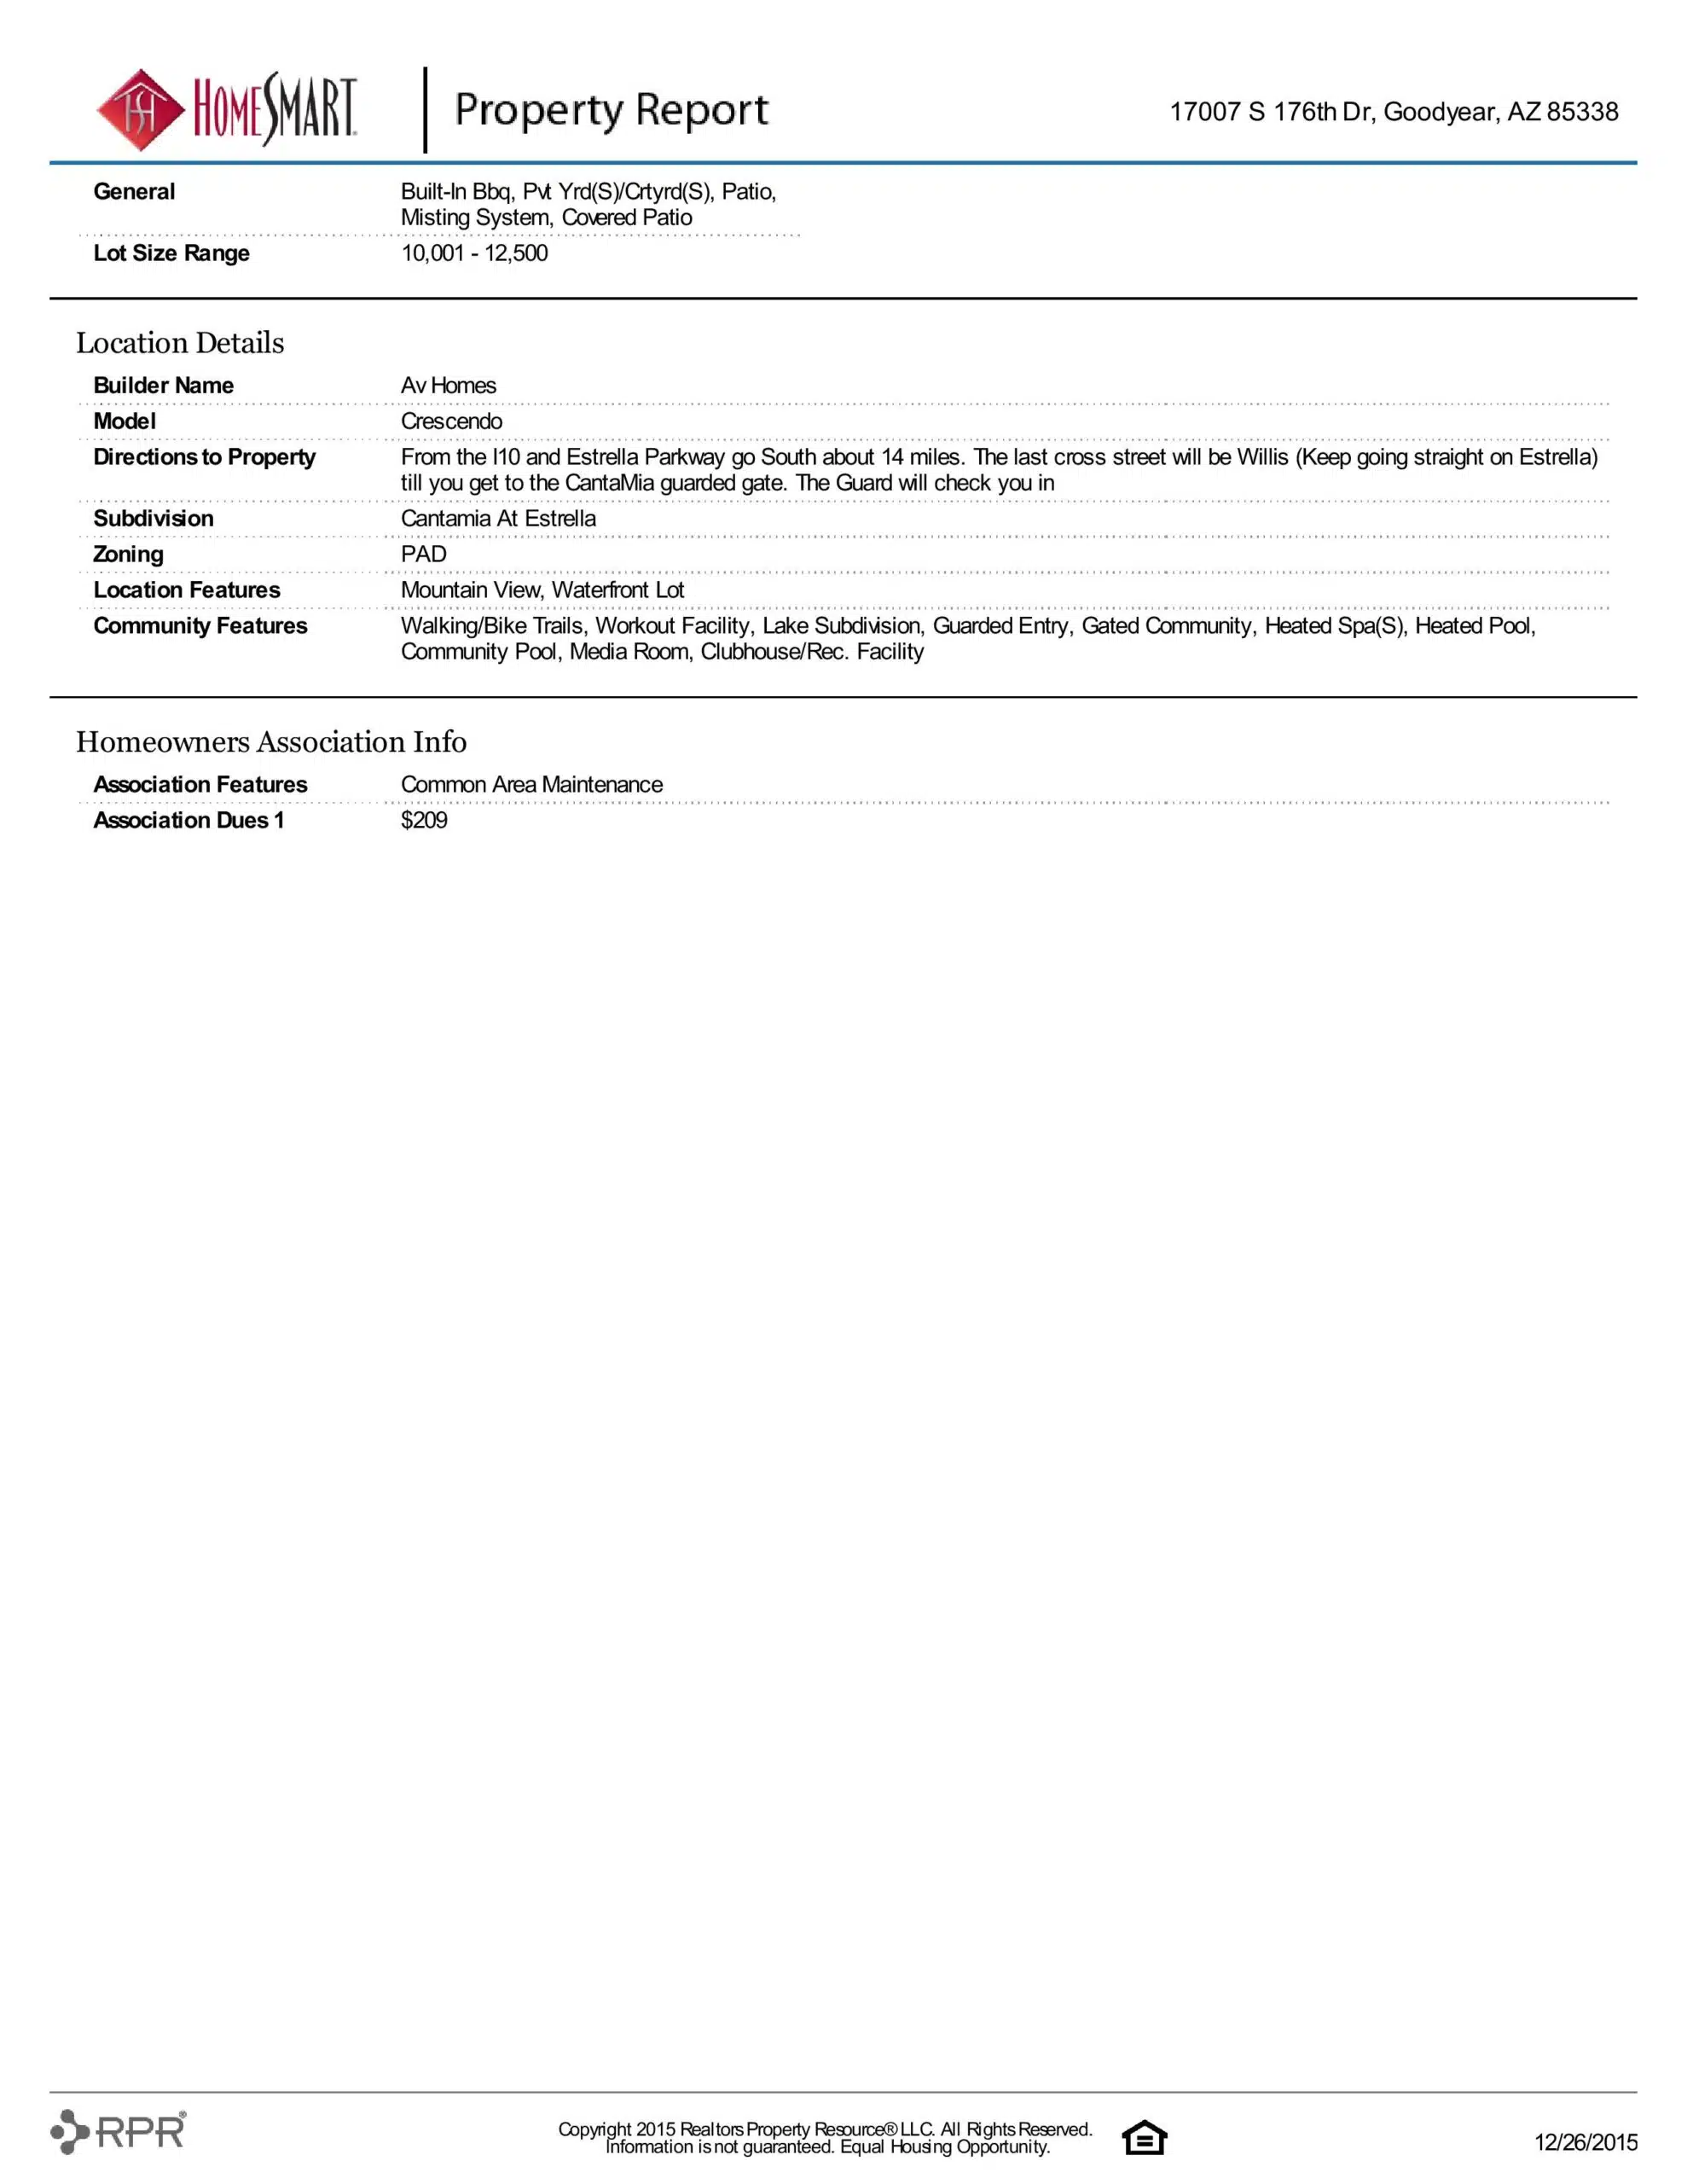 17007 S 176TH DR-page-005